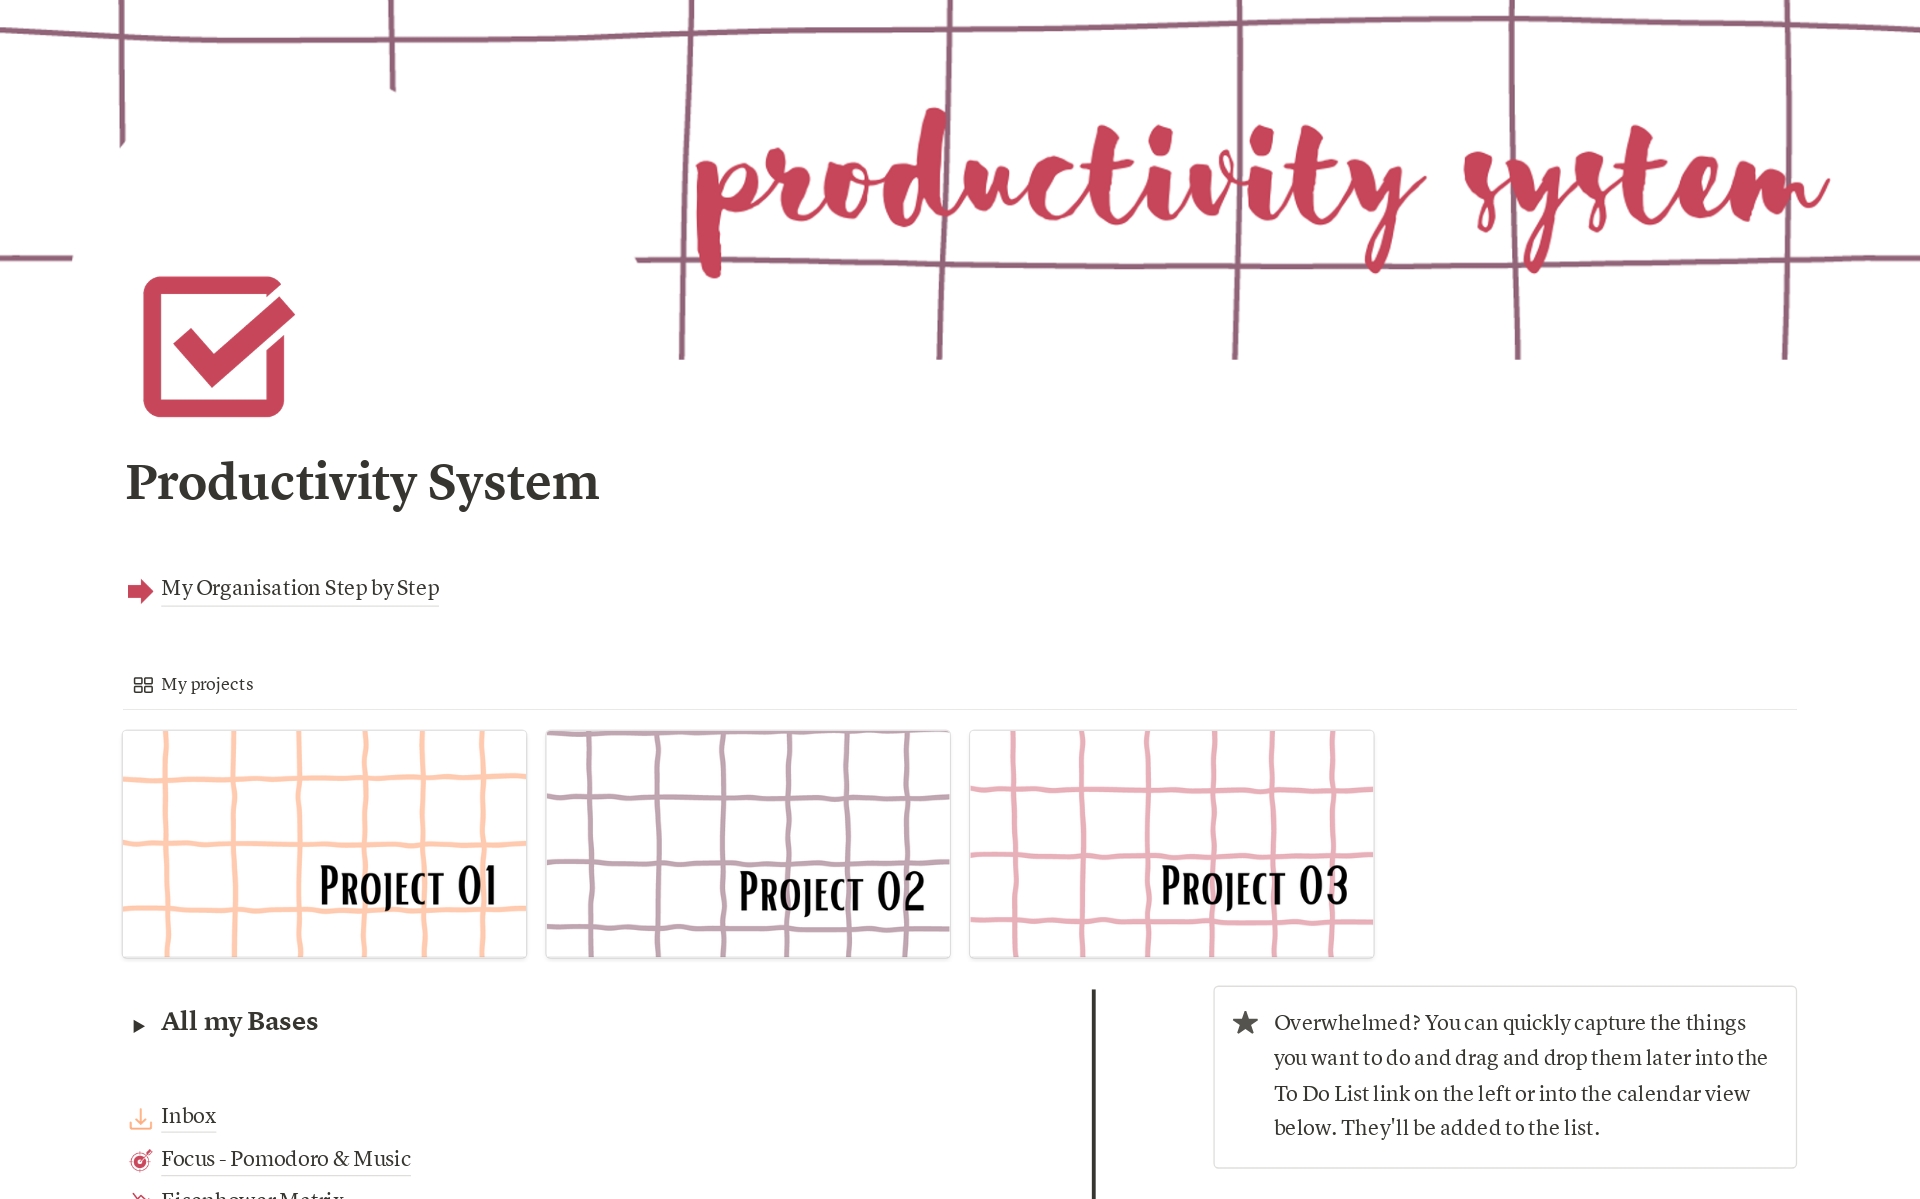 The Productivity System is my most comprehensive system for managing tasks, projects and emergencies. It's the one I use personally on a daily basis